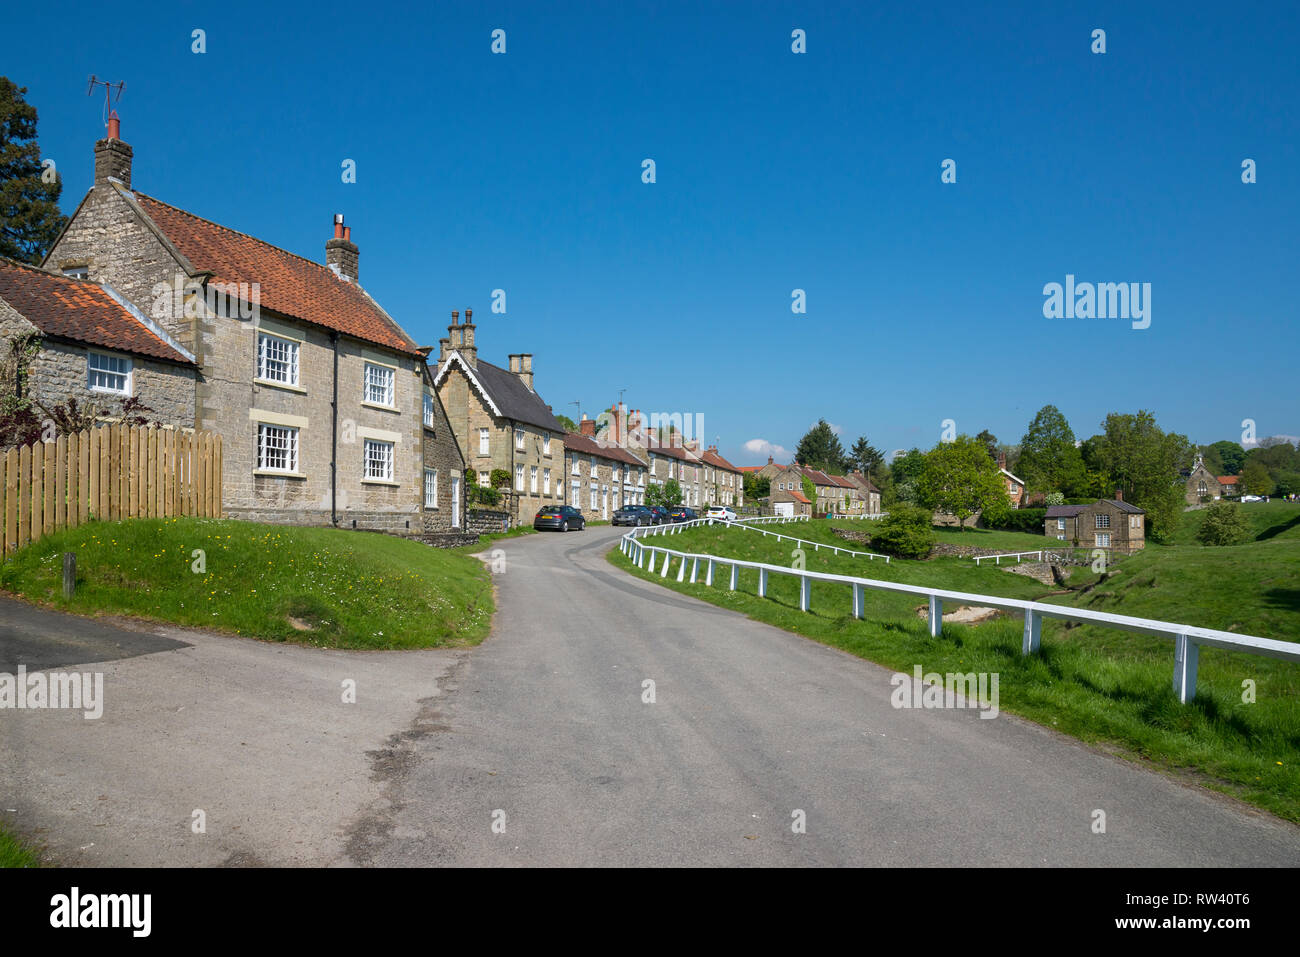 The beautiful village of Hutton-le-Hole in Ryedale, North Yorkshire, England. Stock Photo